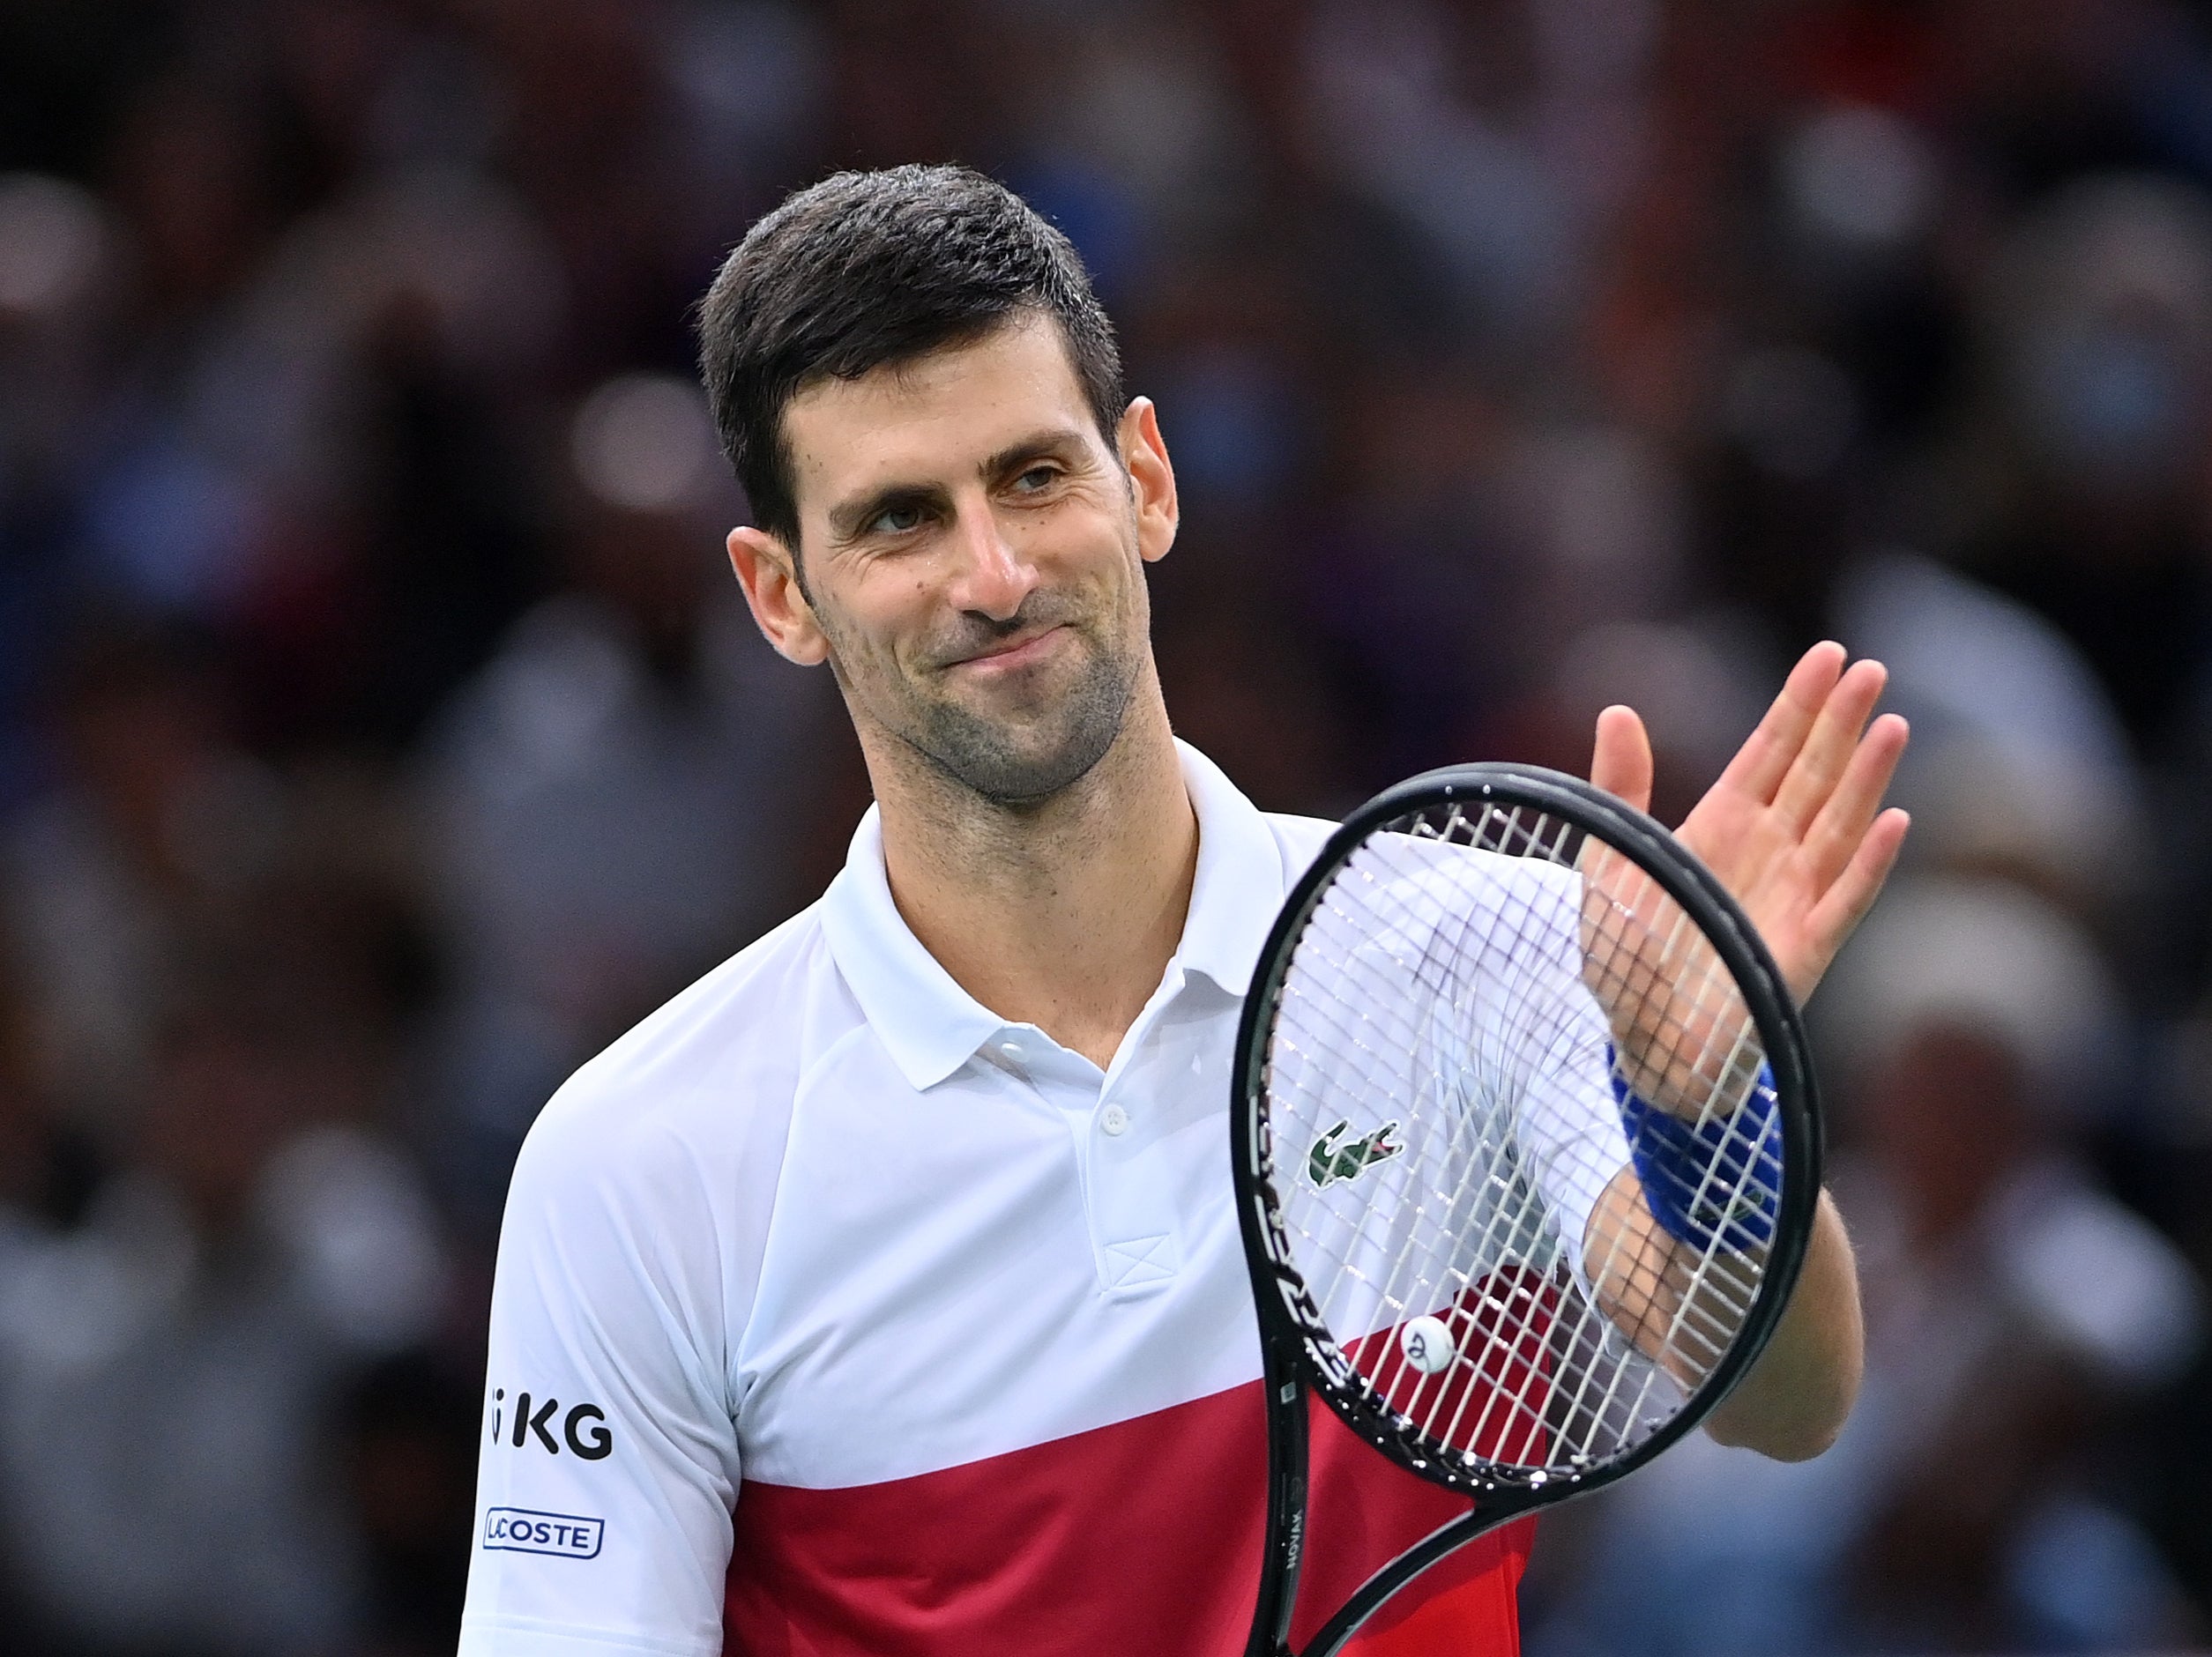 Court overturns Djokovic visa decision – here’s how people are reacting